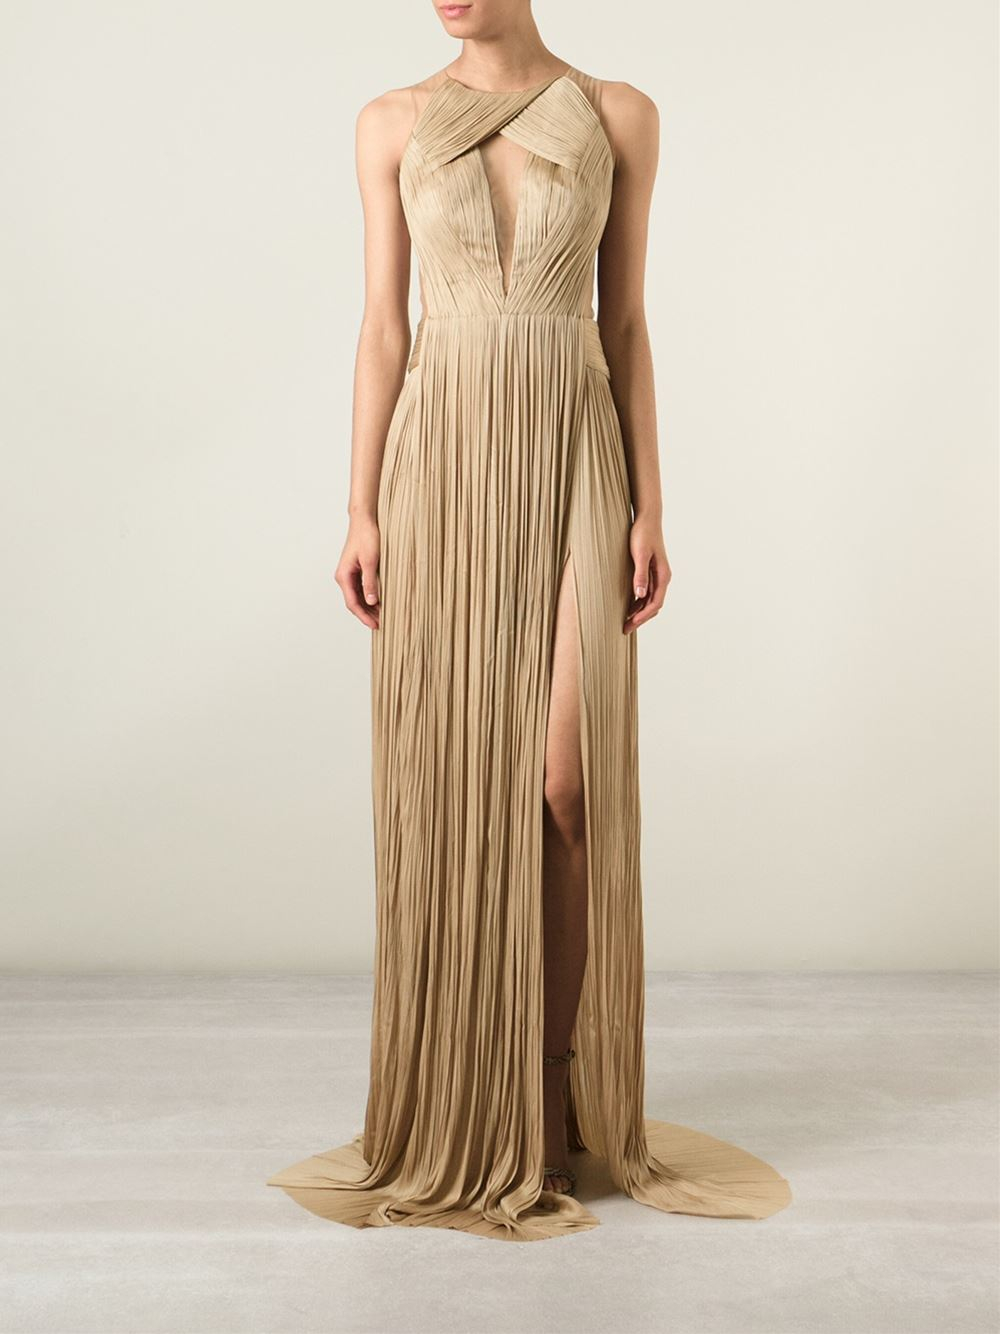 Lyst - Maria Lucia Hohan Mesh-Panel Pleated Gown in Metallic